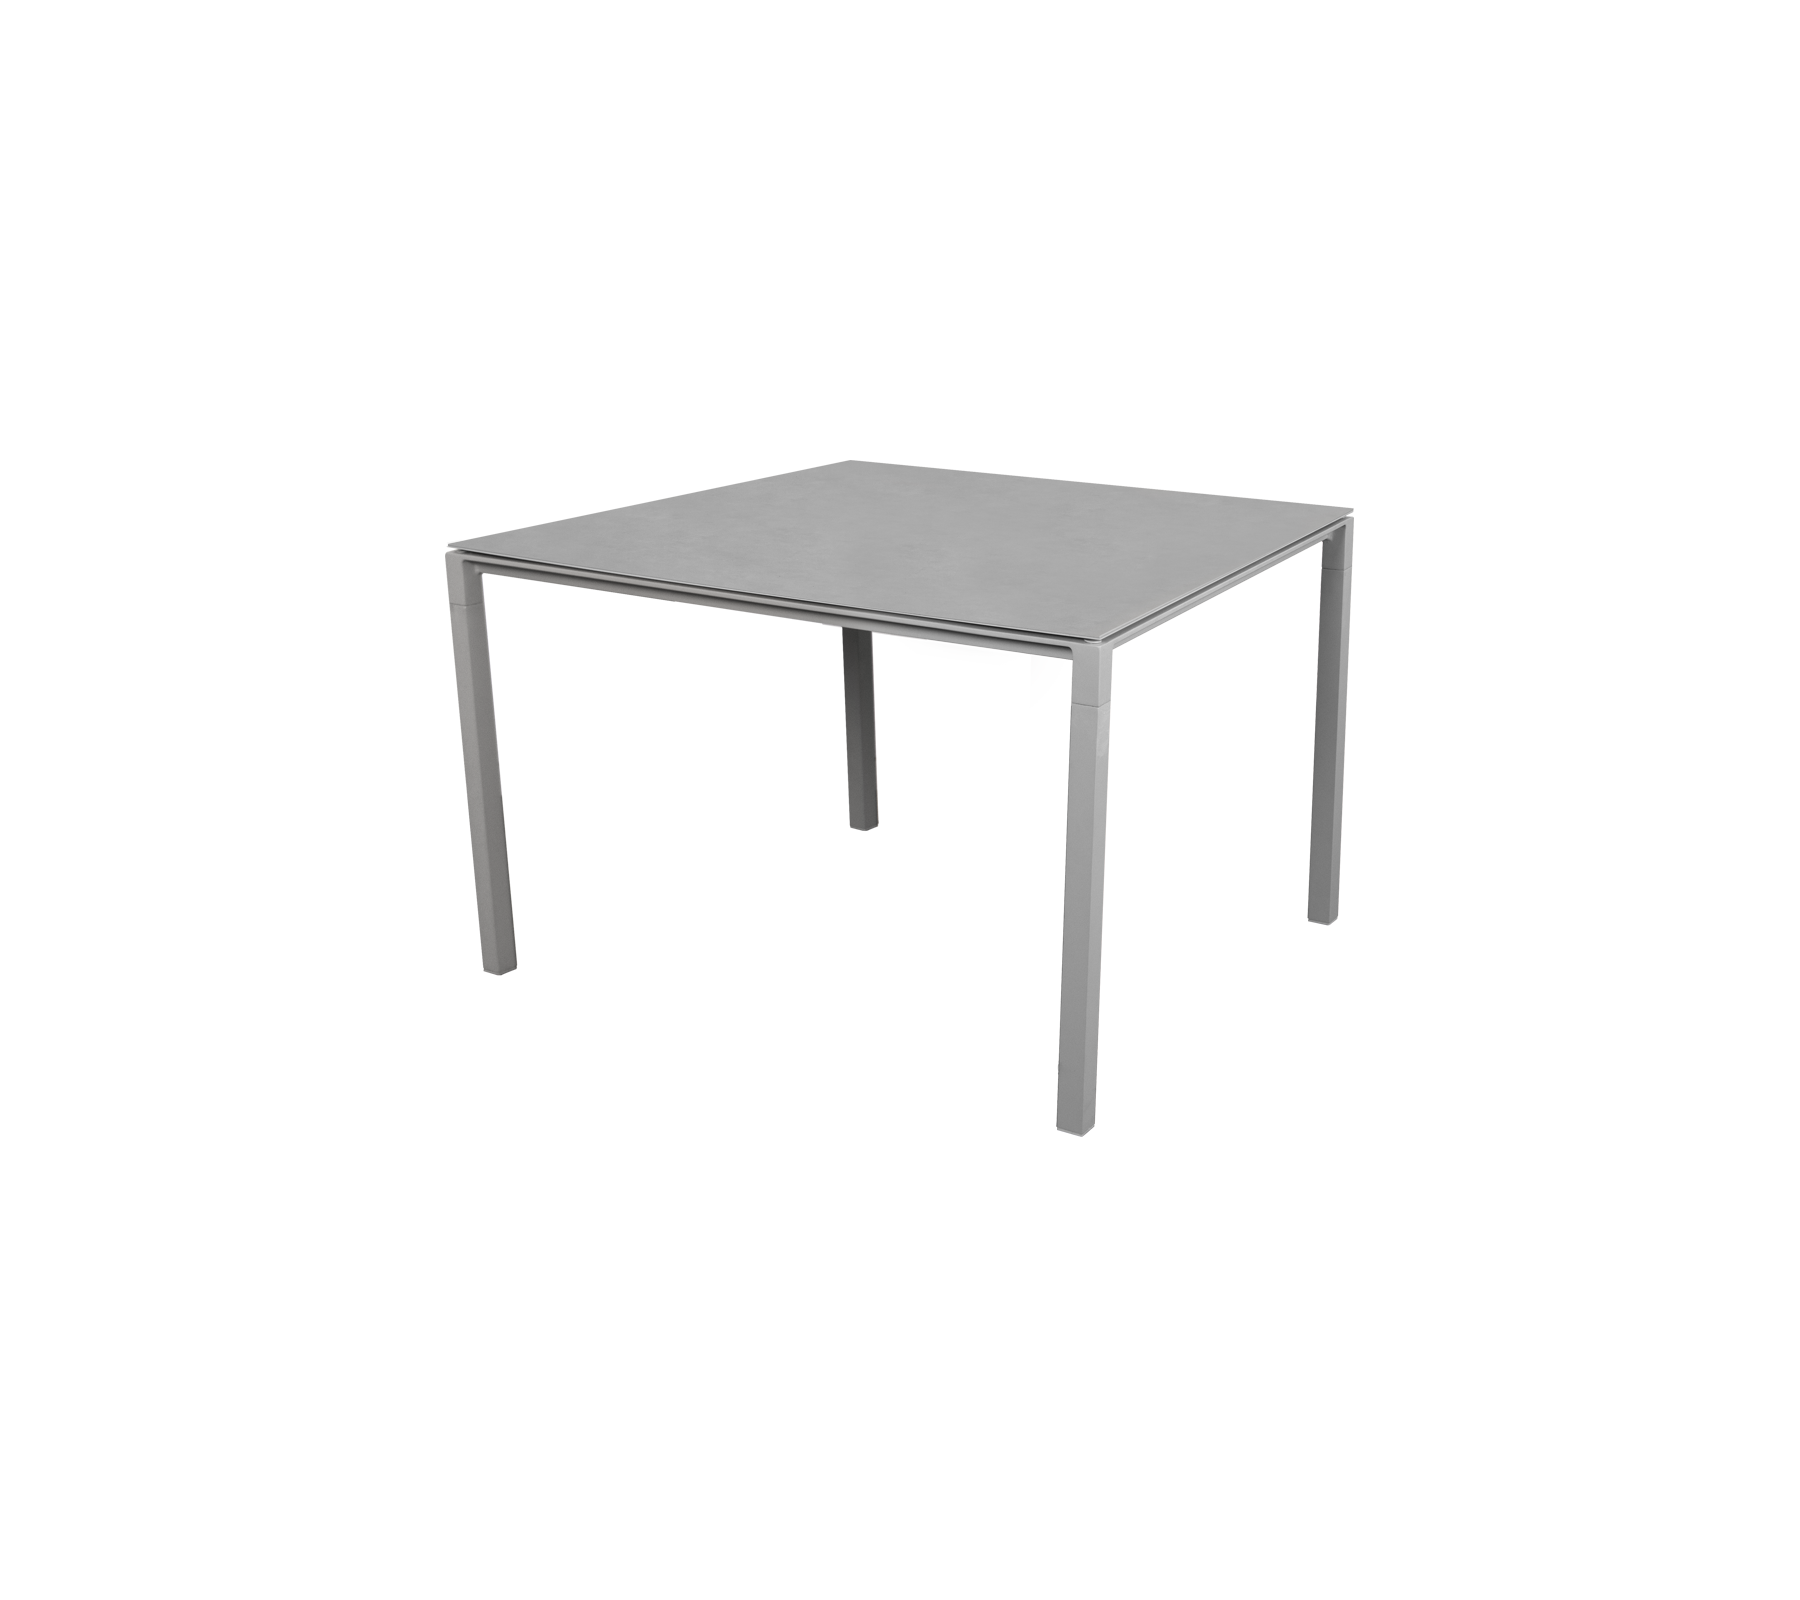 Pure table, 100x100 cm